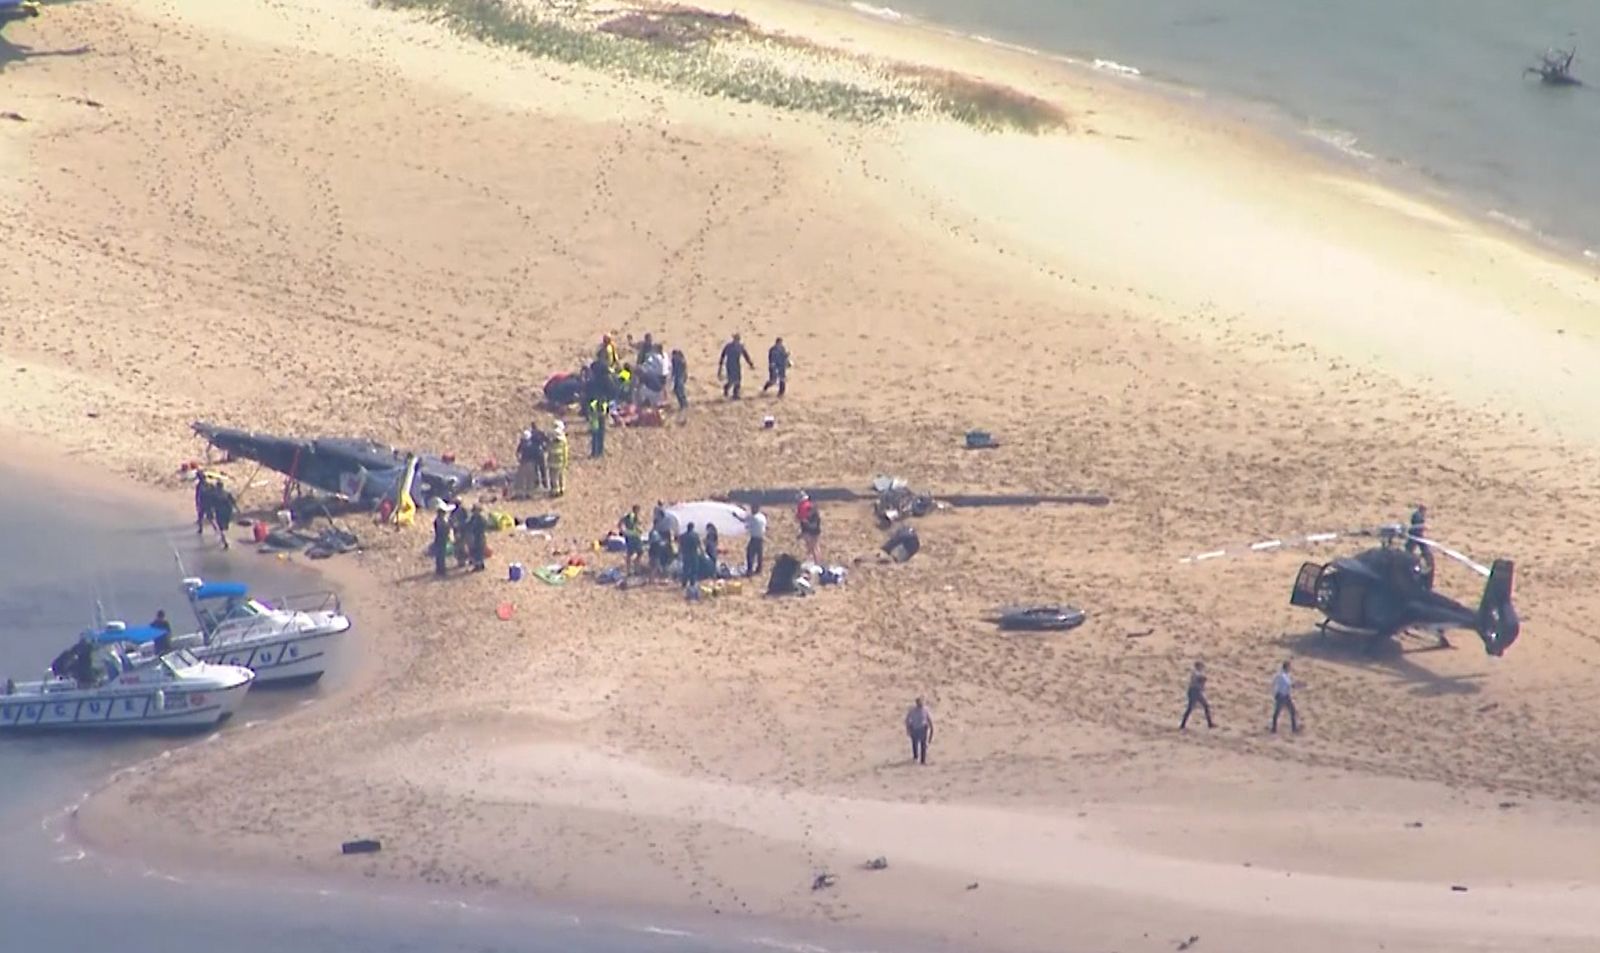 4 Dead And Several Injured After A Helicopter Crash On Australia’s Gold Coast